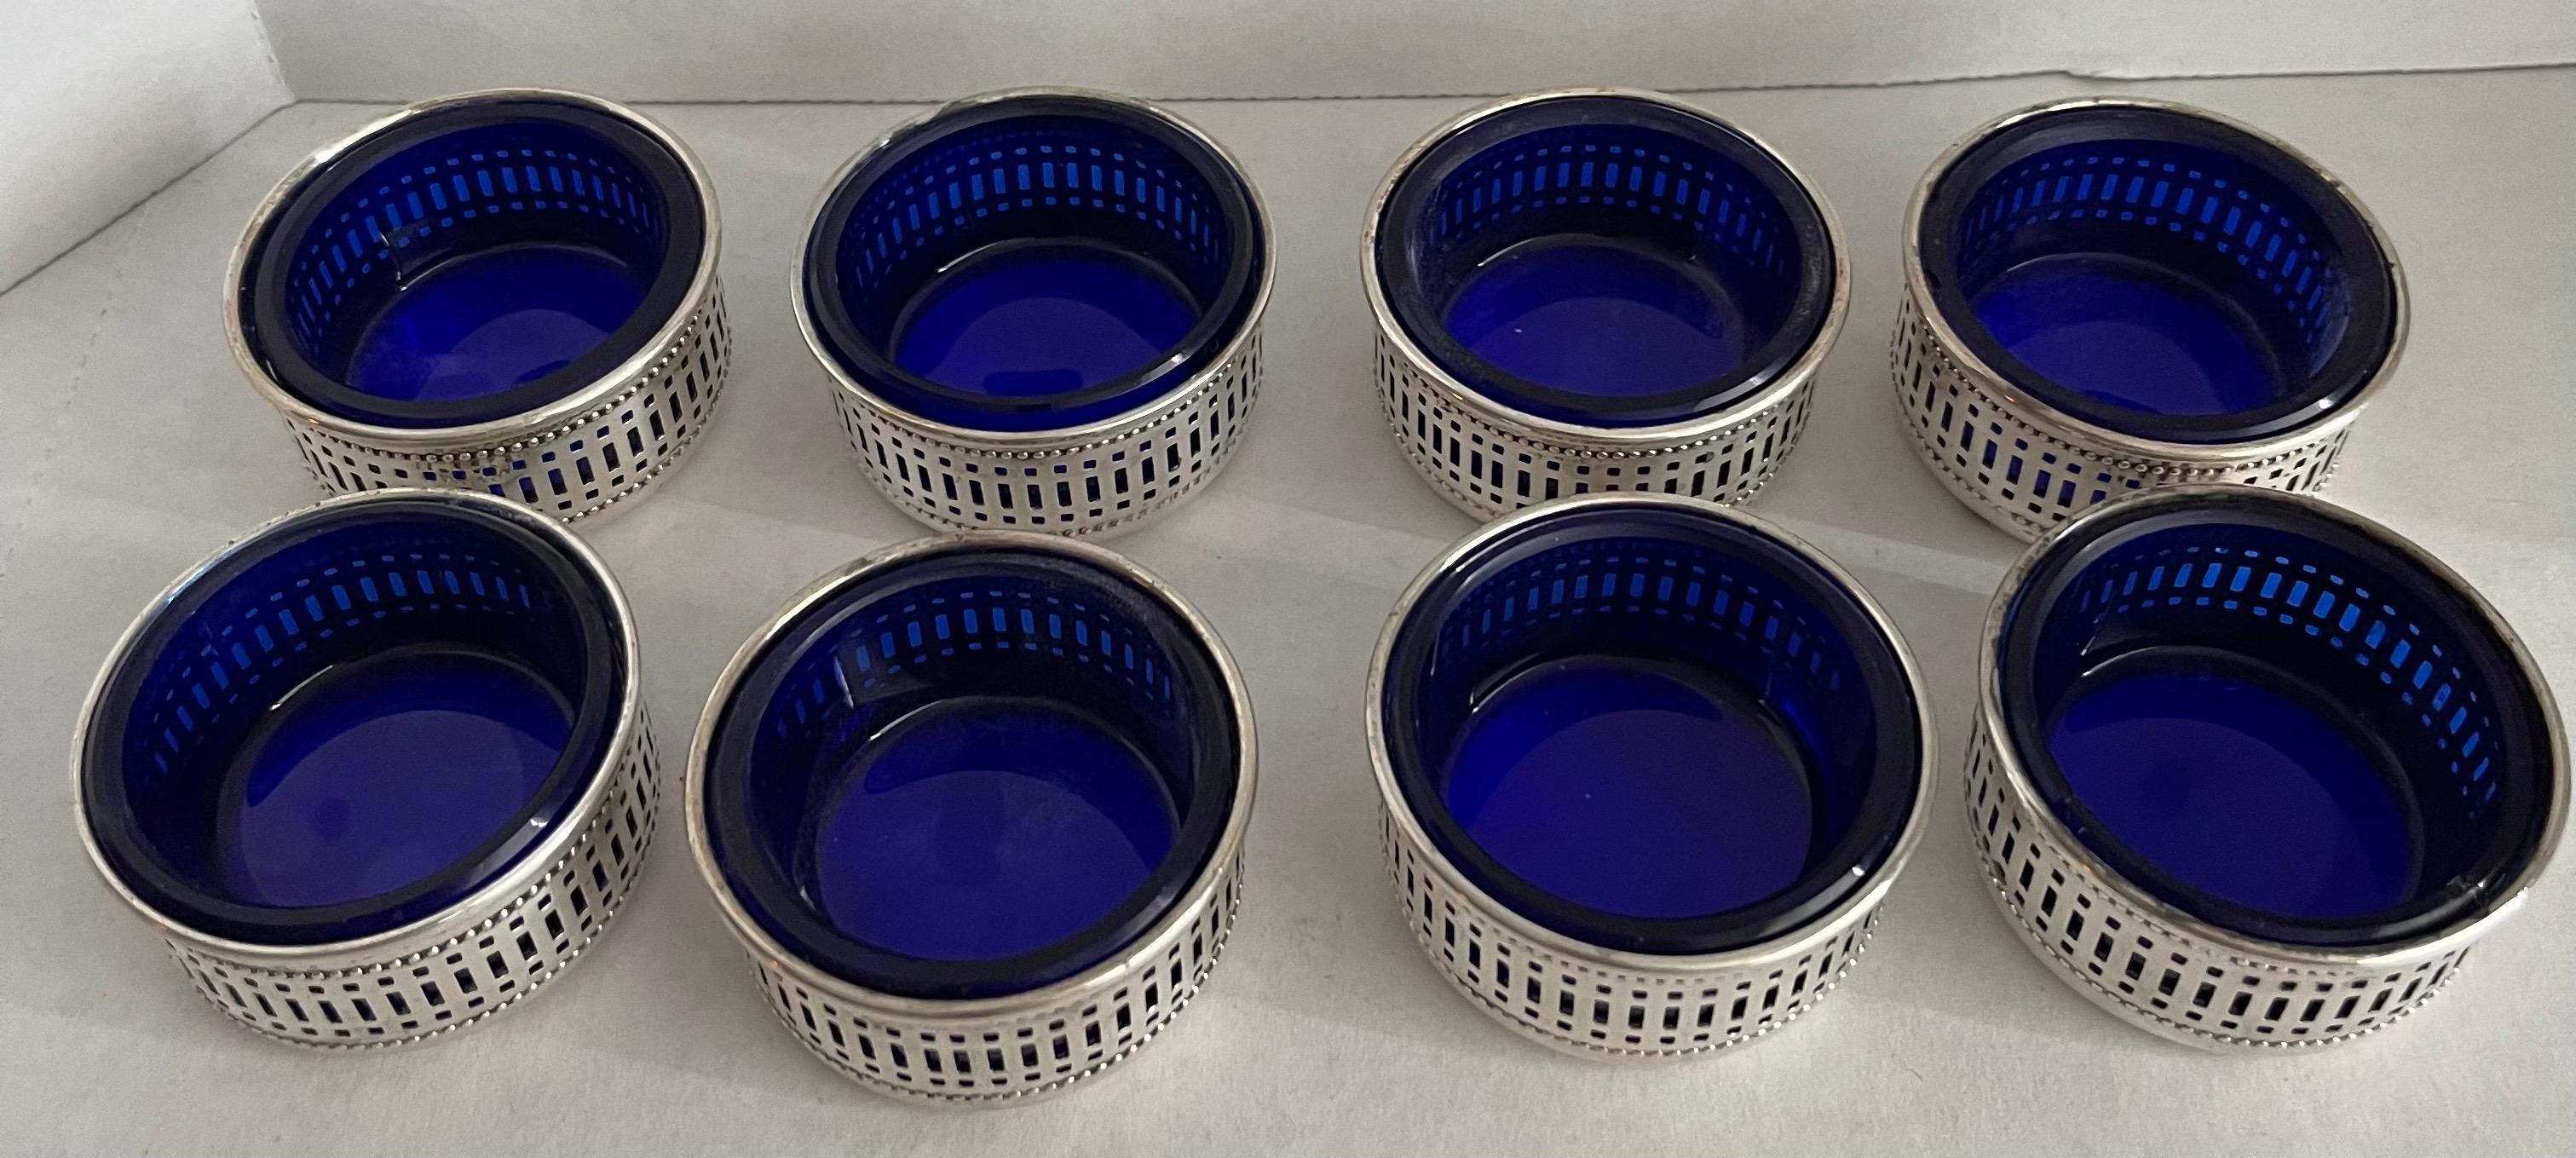 Set of 8 English sterling silver salt cellars with cobalt blue glass liners. Reticulated detailing. Stamped “sterling” on the underside. No makers mark or hallmarks.